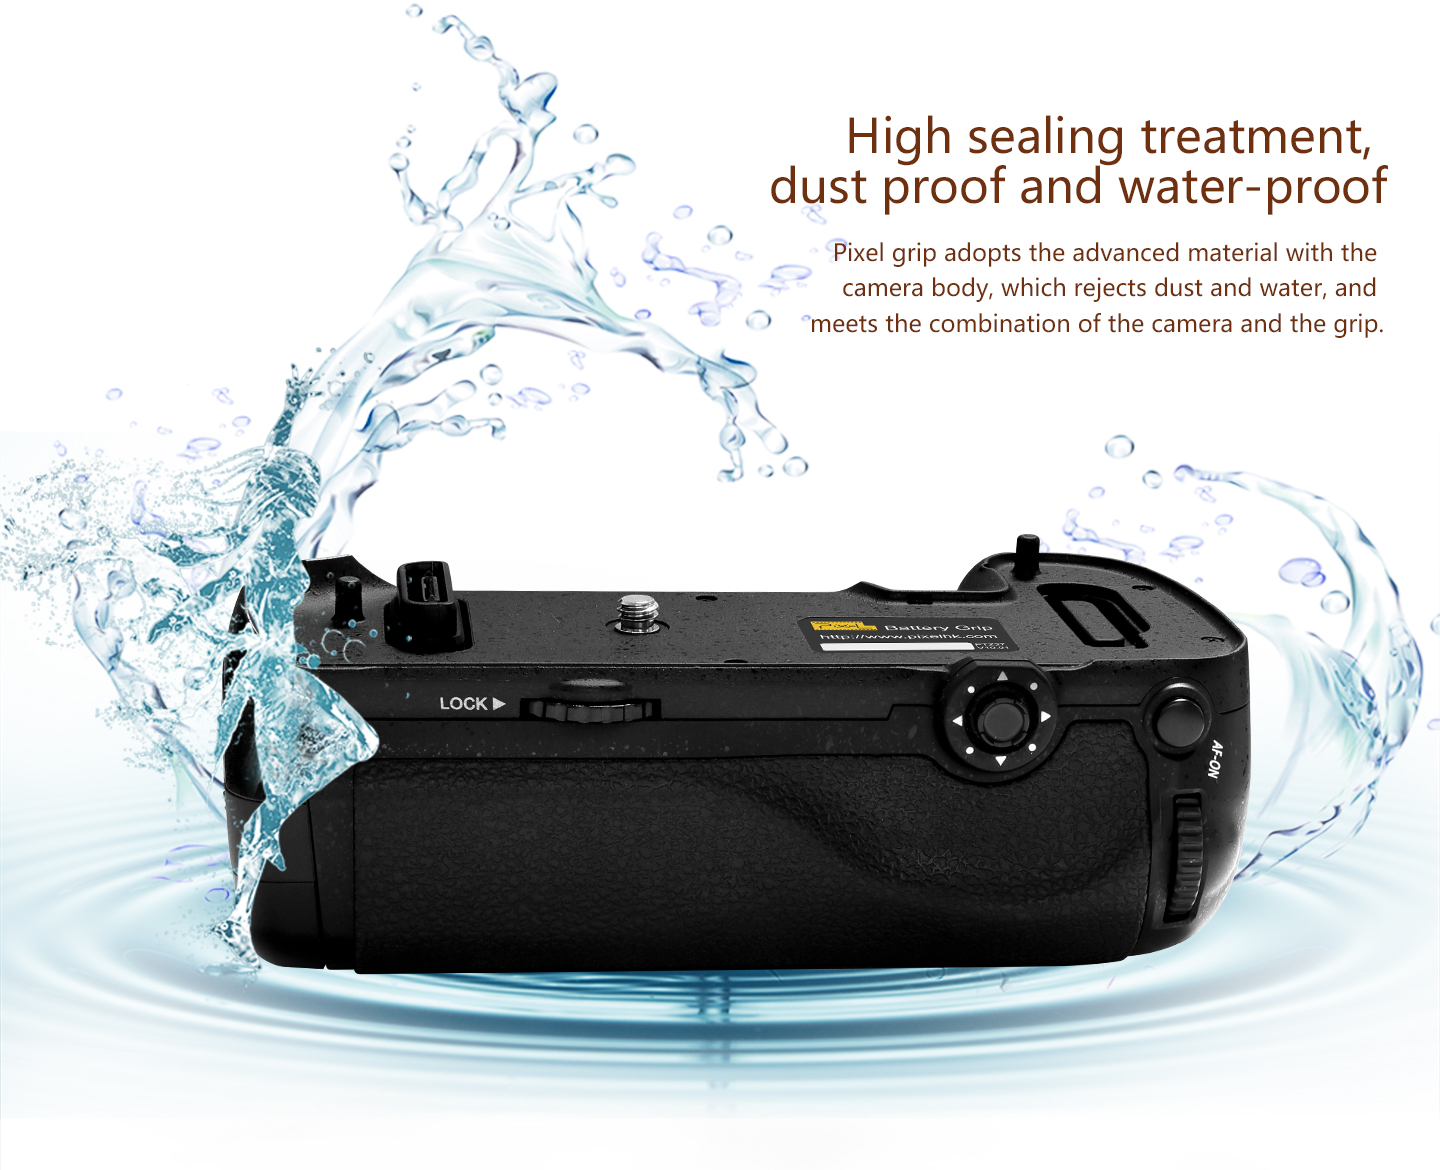 High sealing treatment, dust proof and water-proof